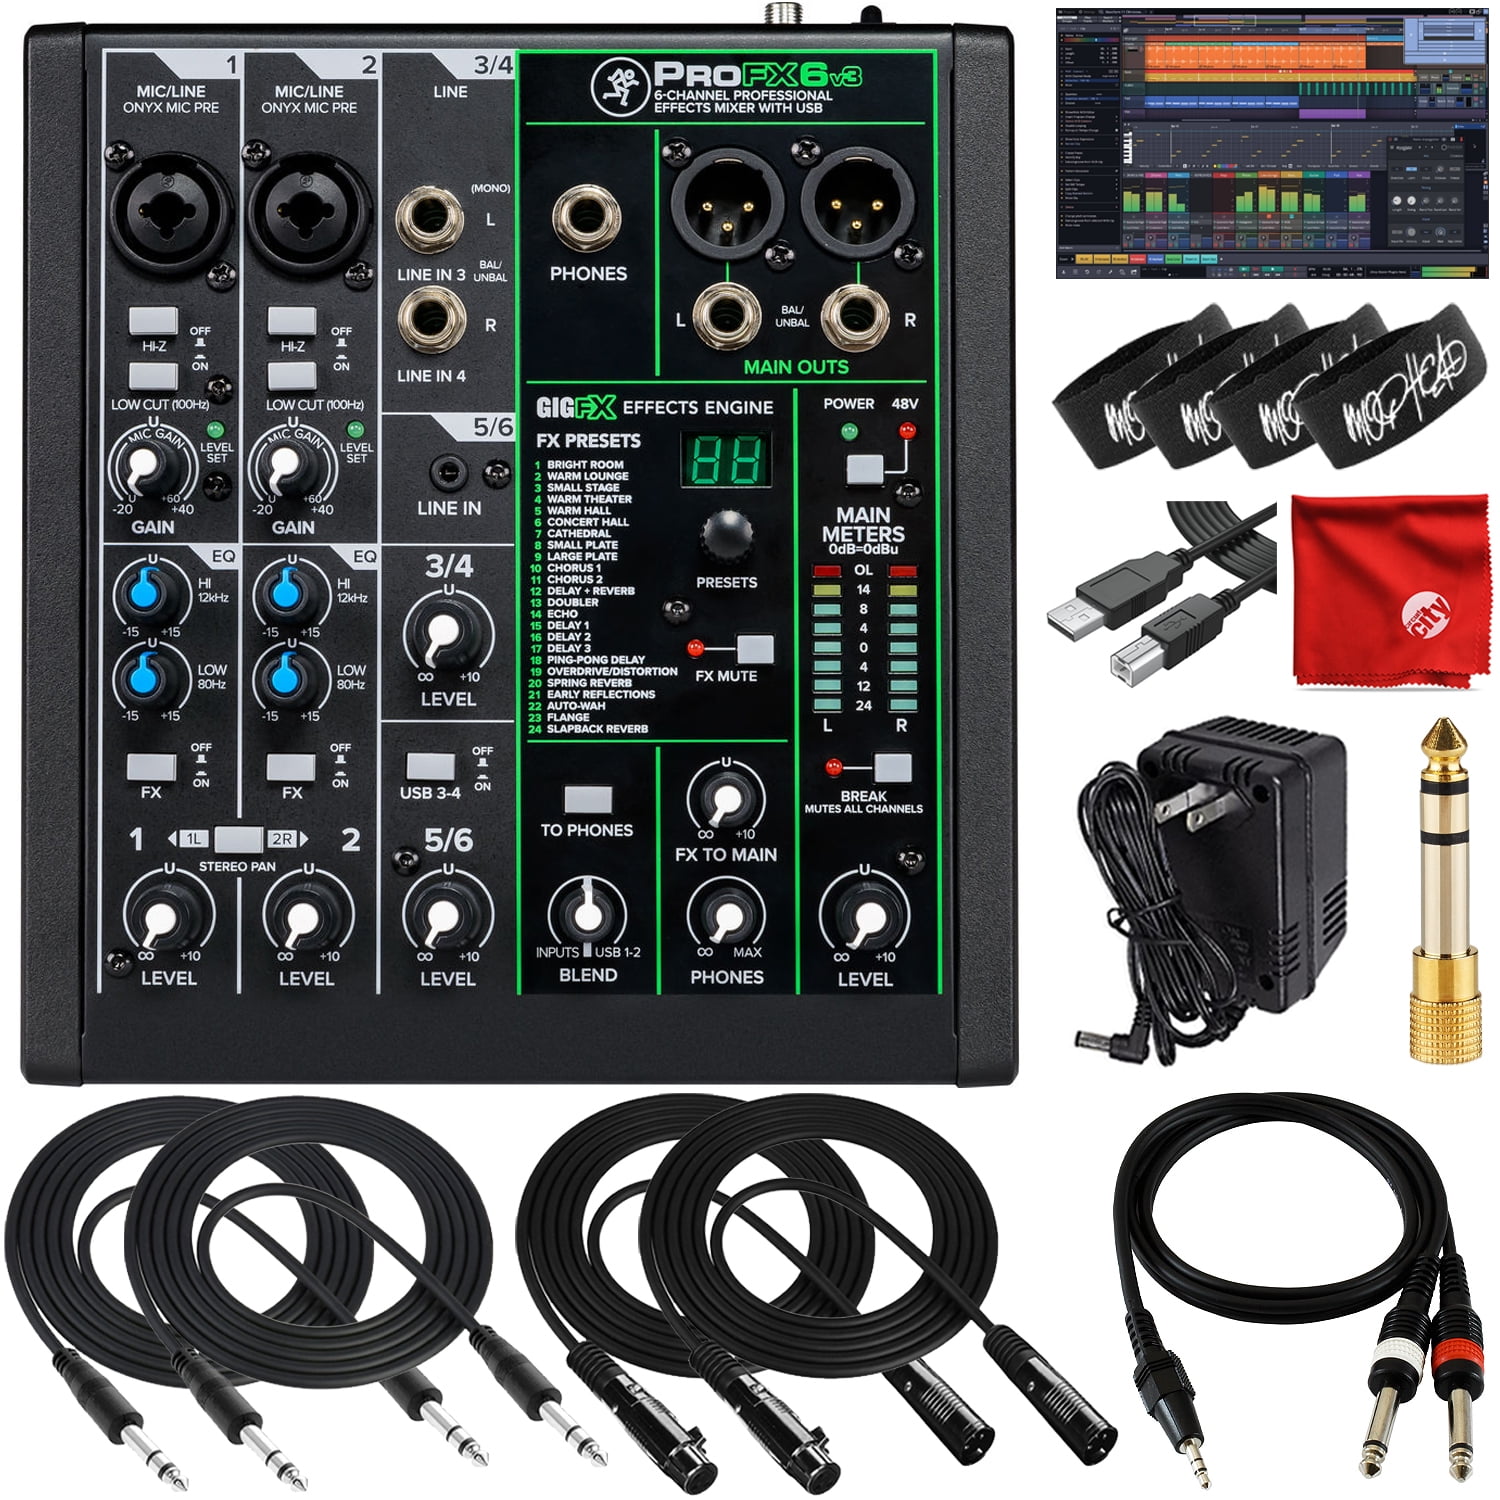 6-Channel　USB　10-Foot　10-Foot　Microfiber　Bundle　with　and　ProFX6v3　to　Mophead　TS　Unpowered　Ties　OEM　Cable　2x　Mackie　Cable,　4x　TRS　XLR　Cable,　3.5mm　Mixer　1/4